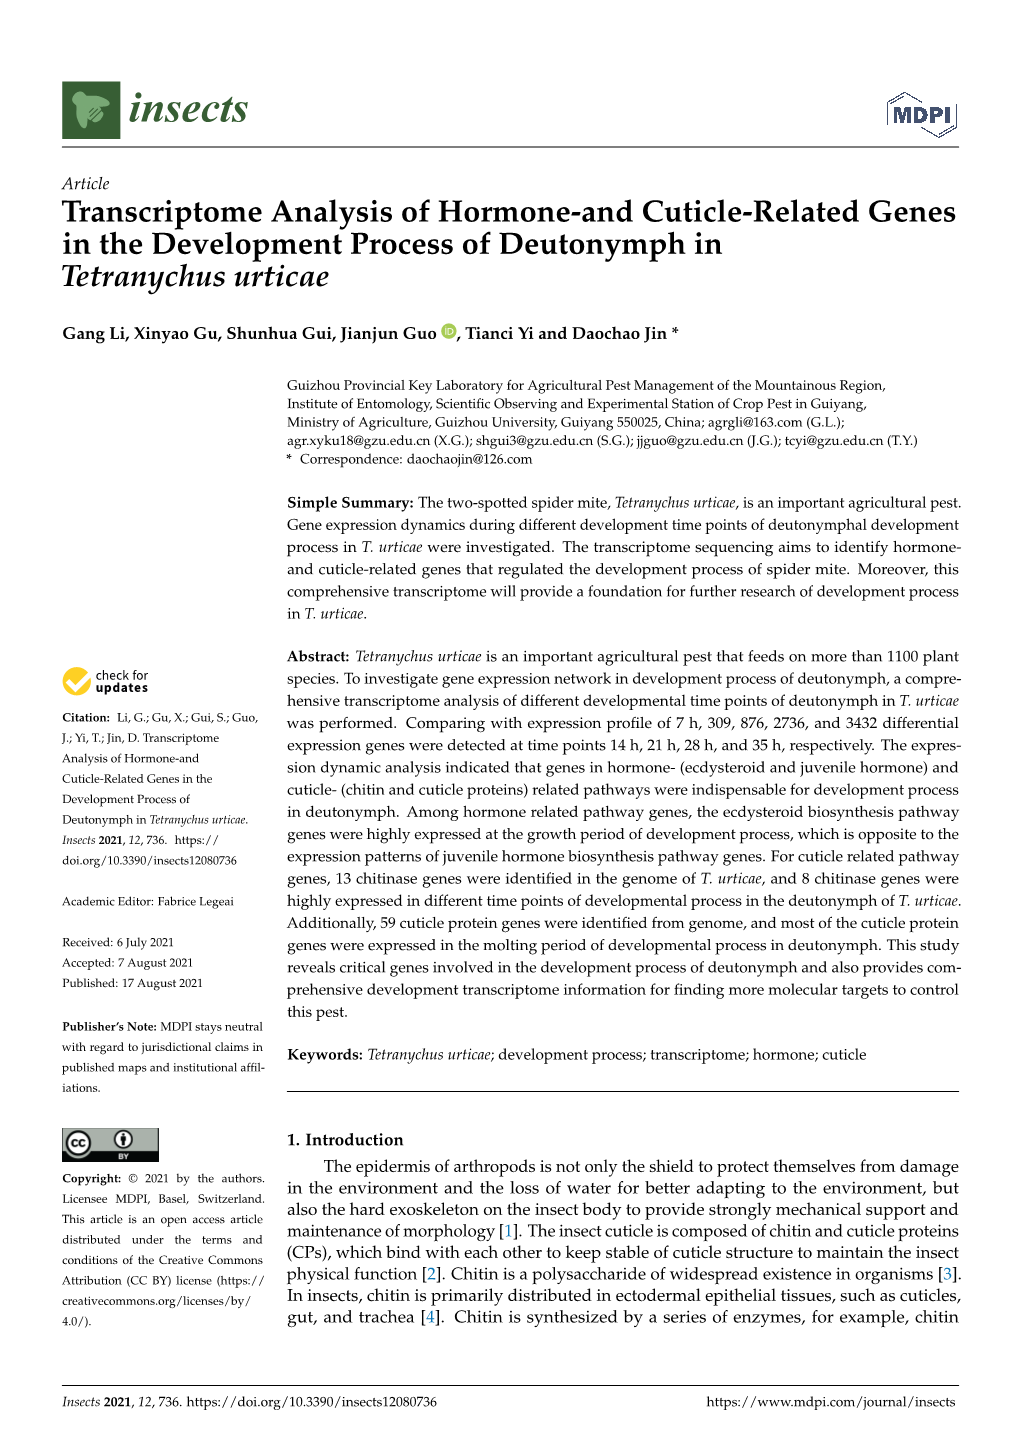 Transcriptome Analysis of Hormone-And Cuticle-Related Genes in the Development Process of Deutonymph in Tetranychus Urticae